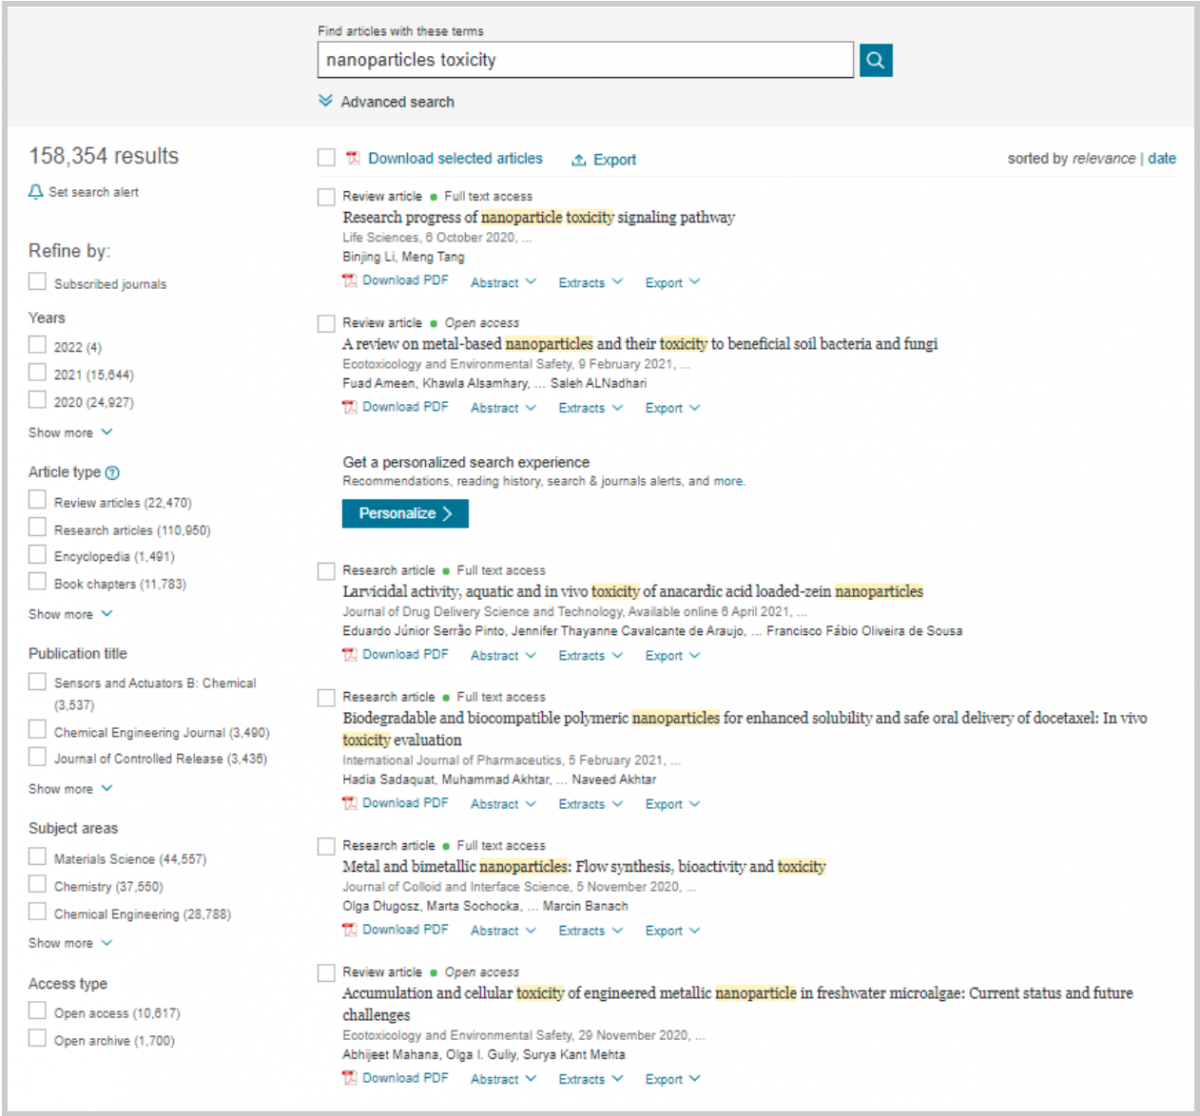 Sample of search result screen displaying the results for a keyword search on nanoparticles. Displays ways to refine search such as by year, article type, publication title, subject areas and access type. Ability to sort results by relevance or date.